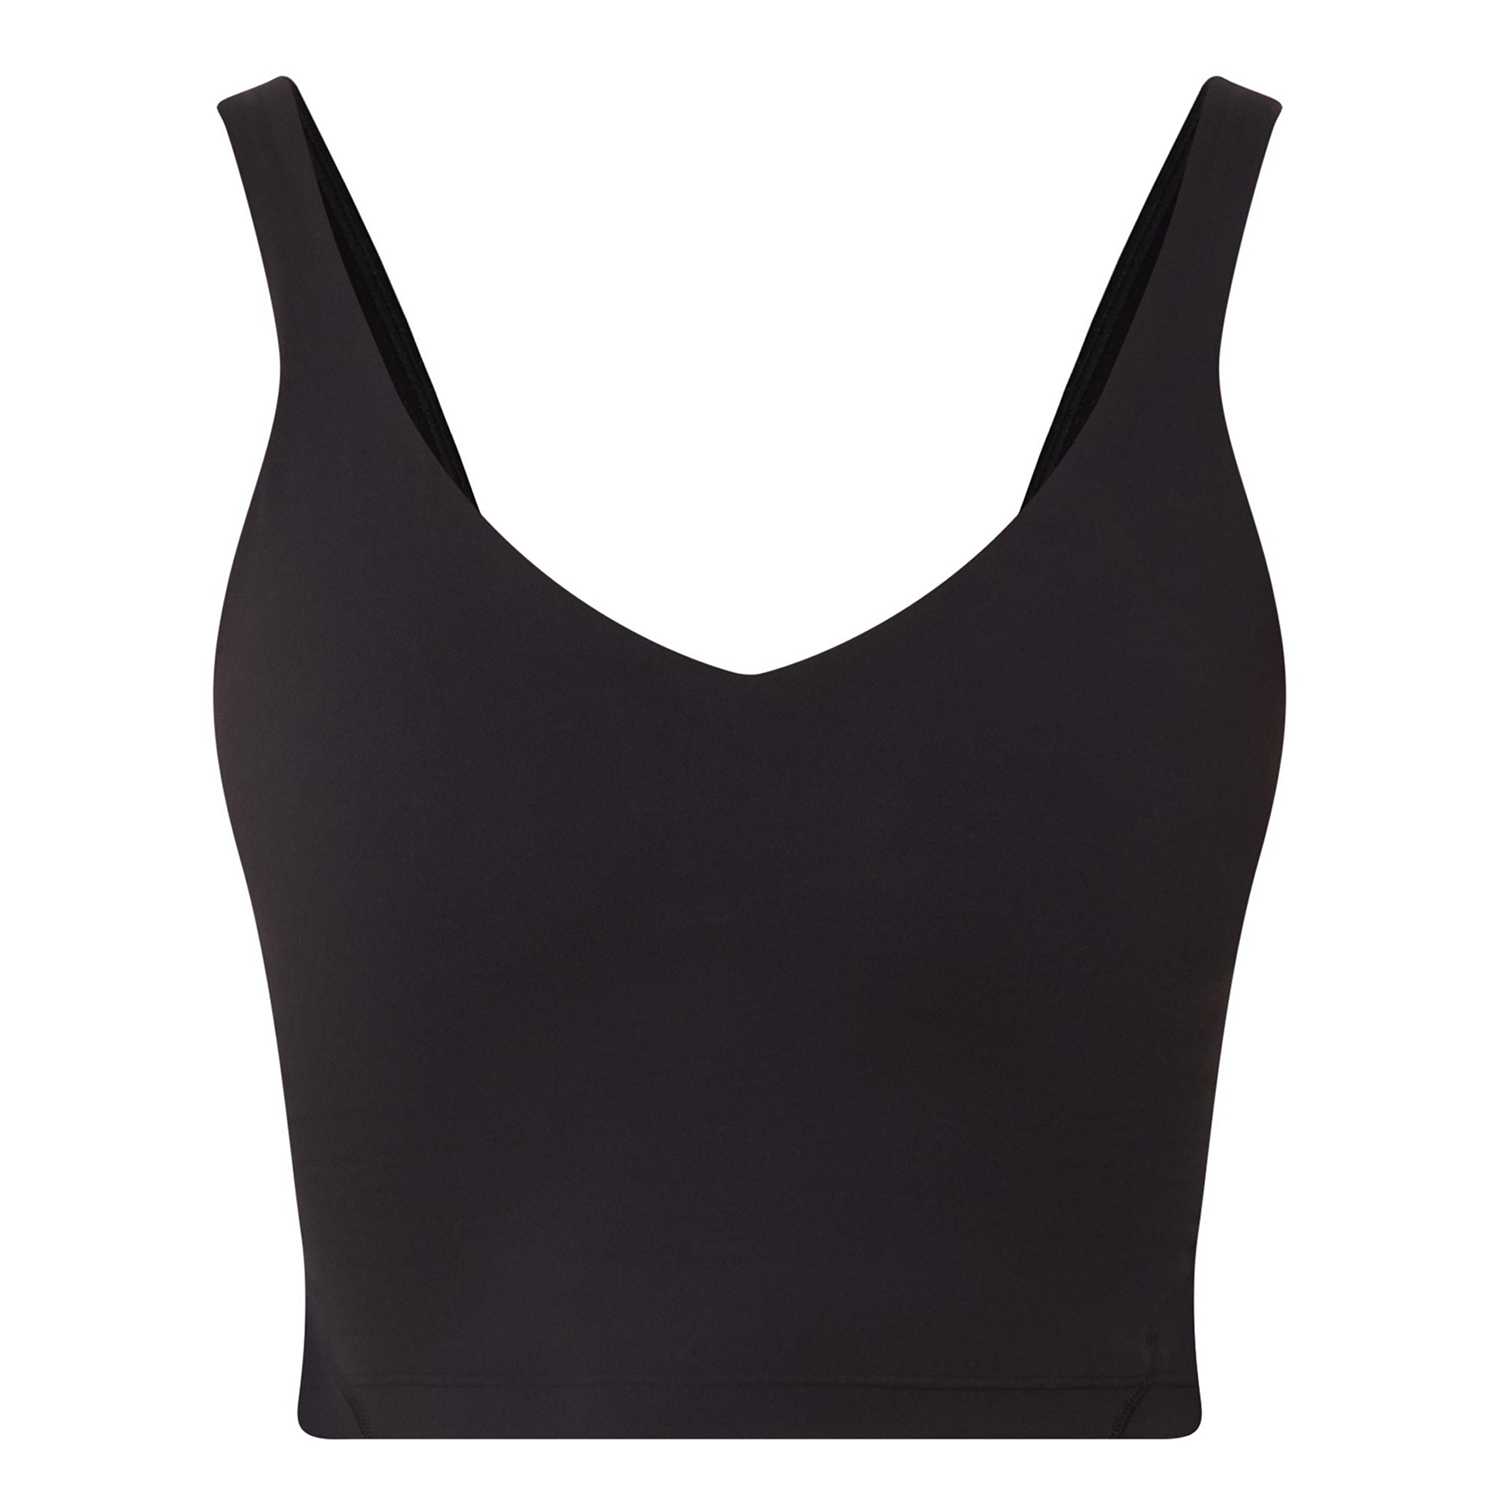 Tom Ford for Women SS24 Collection  Tank top bras, Black bra, Tank top  camisole